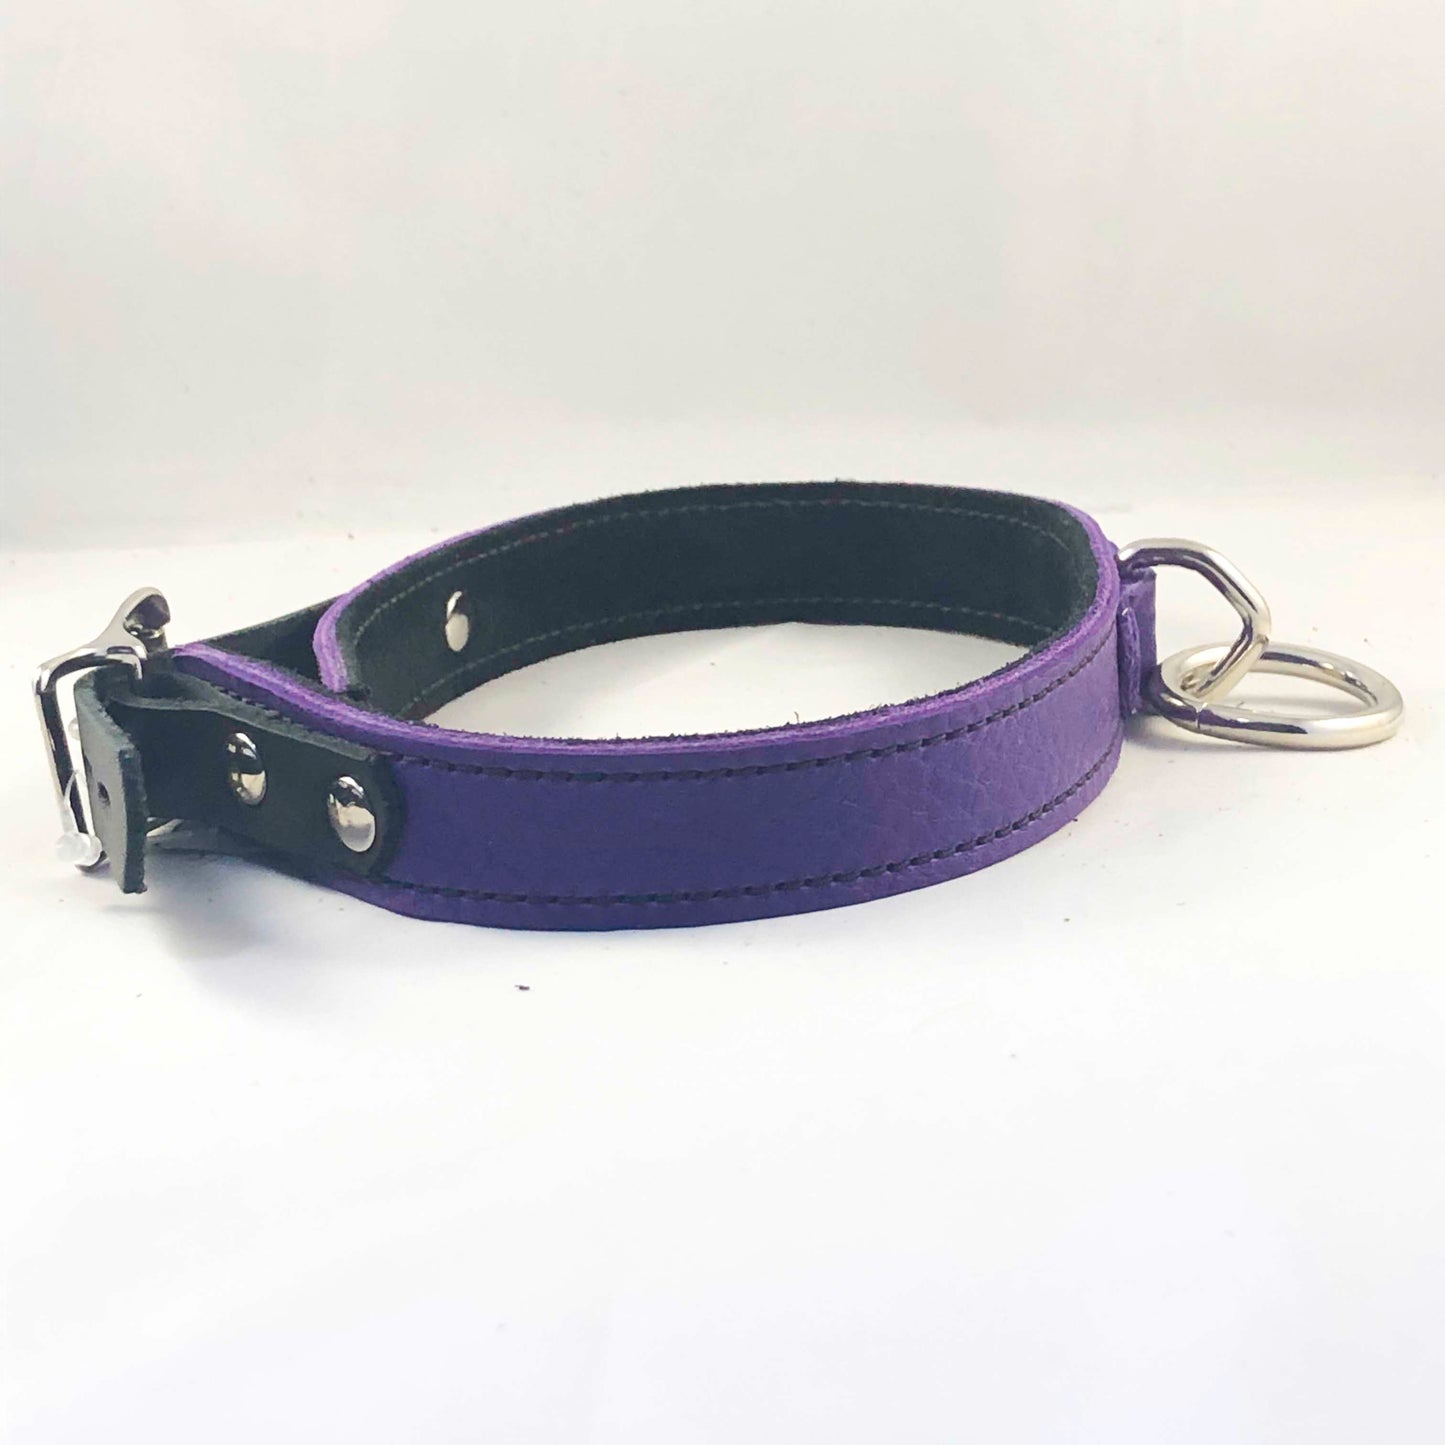 The side view of the purple Basic Single Ring Collar.